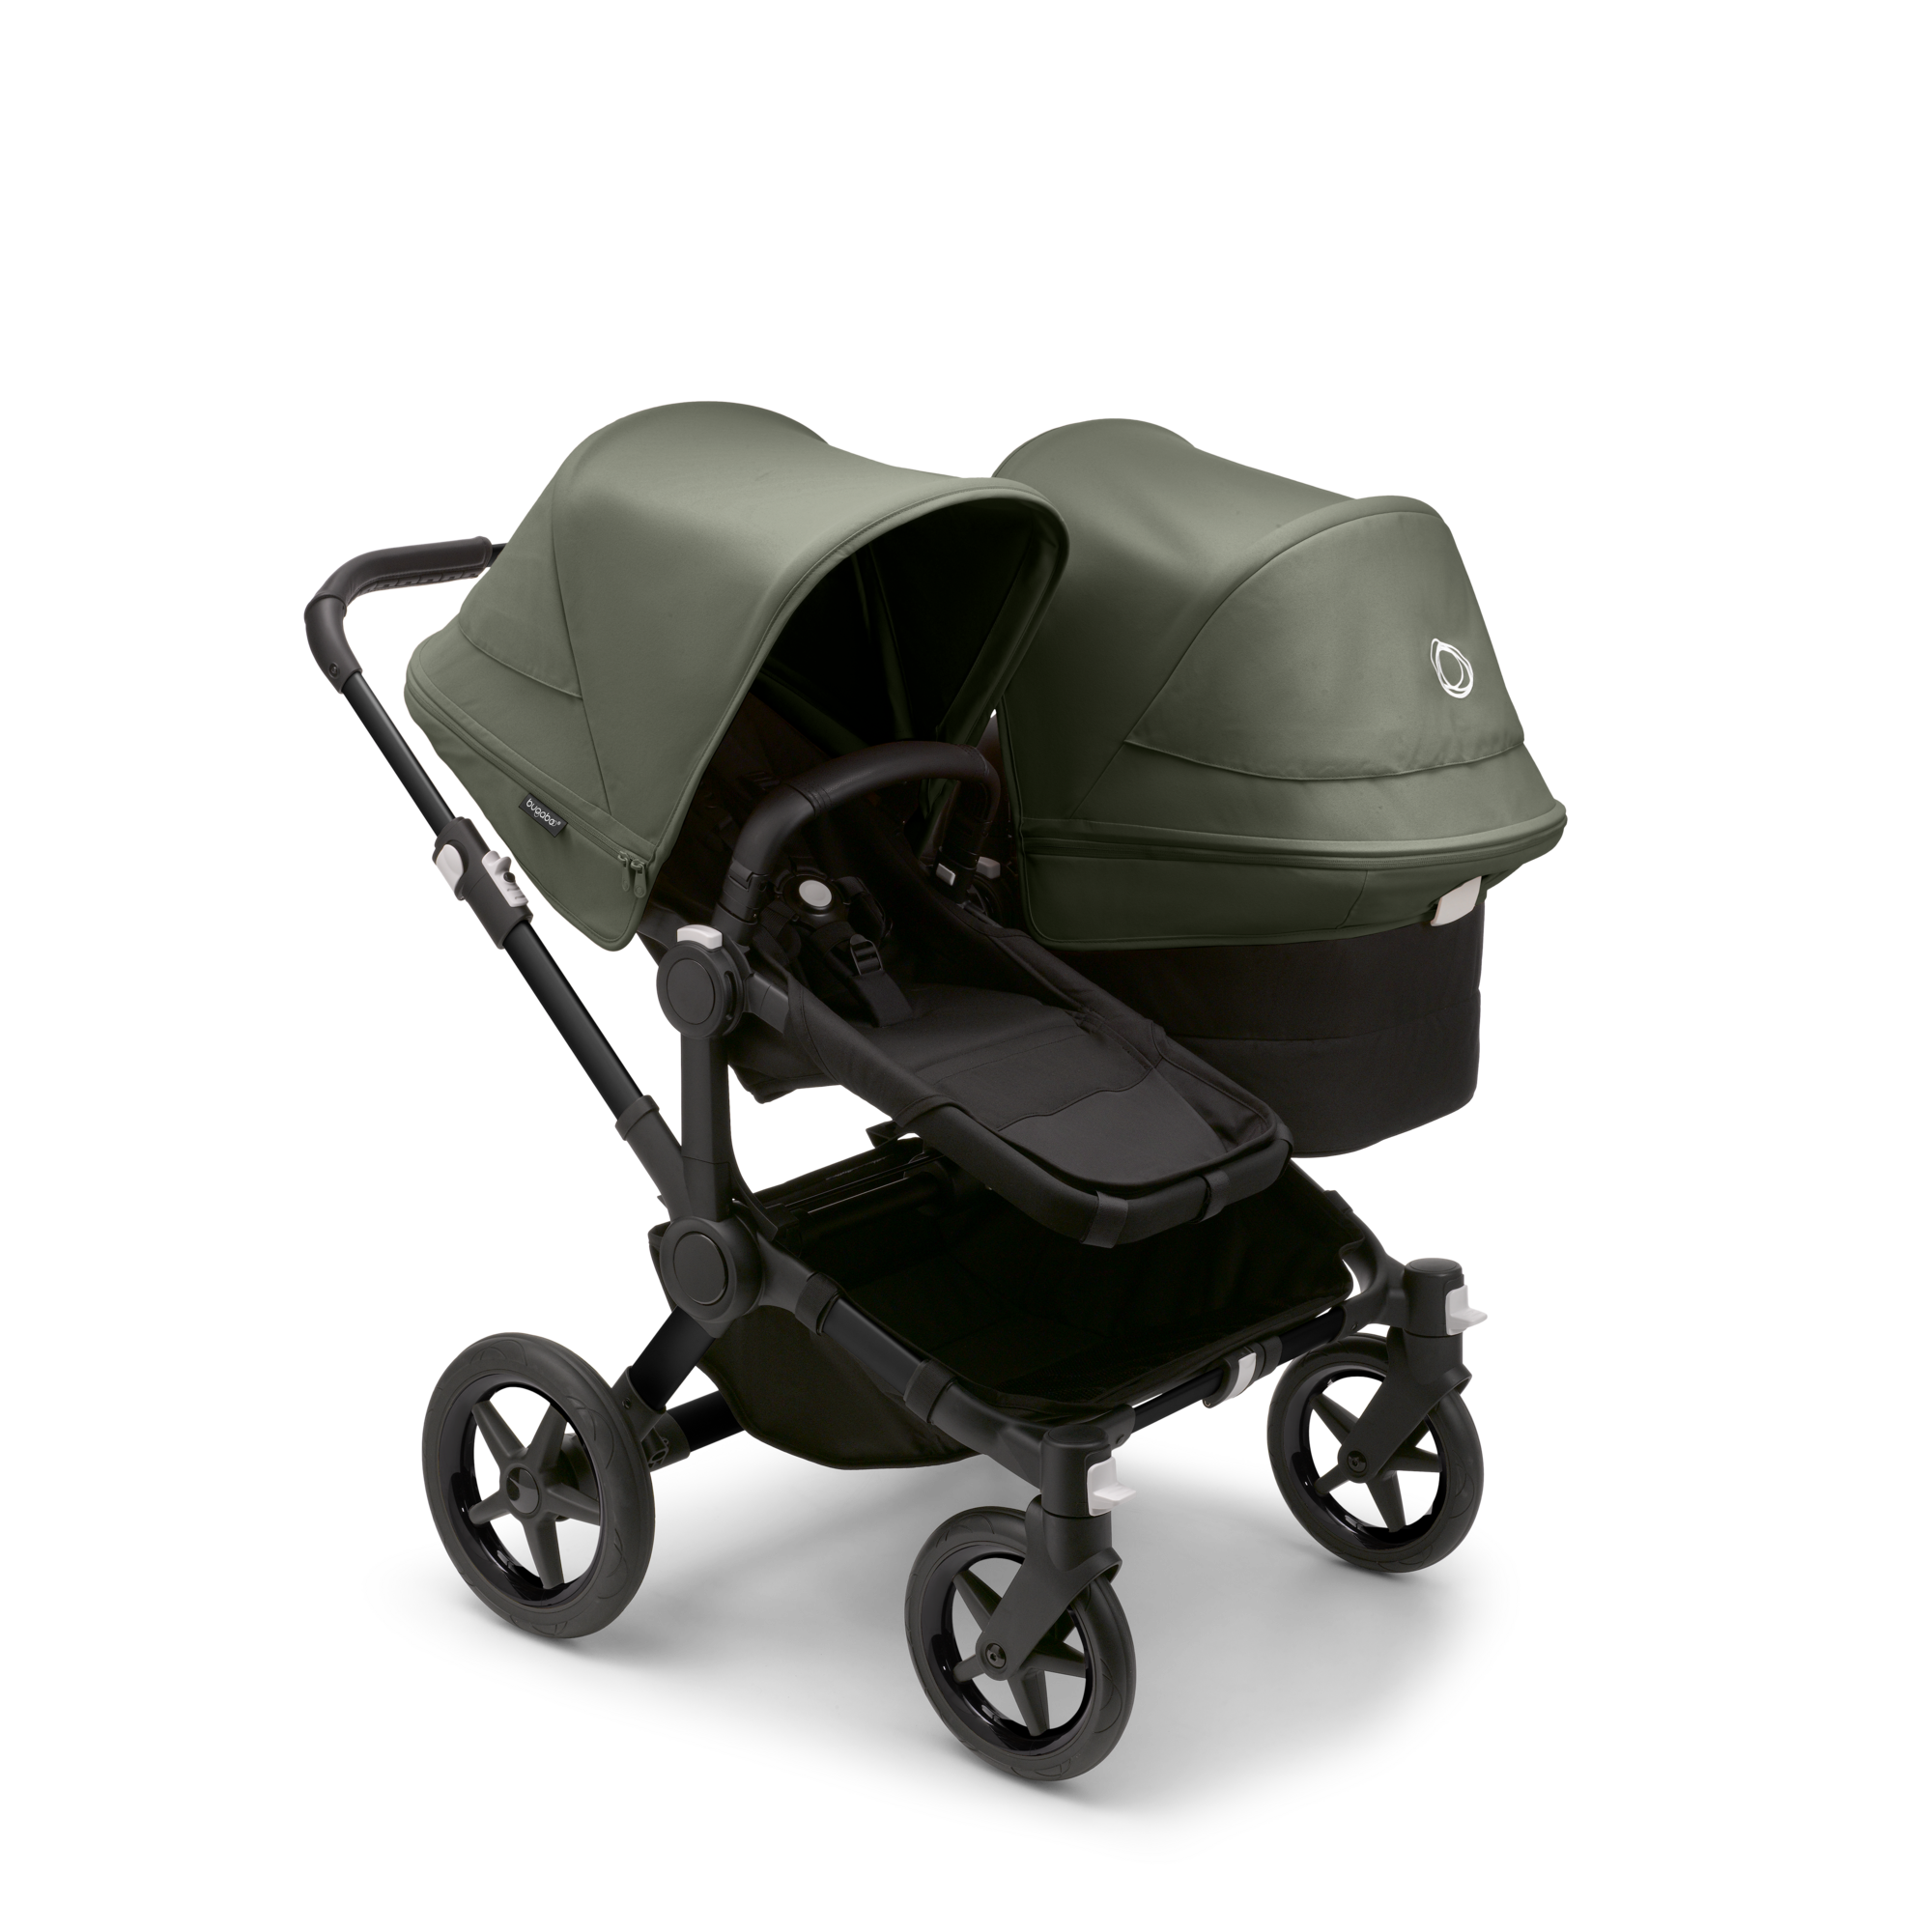 Bugaboo Donkey 5 Duo bassinet and seat stroller black base midnight black fabrics forest green sun canopy